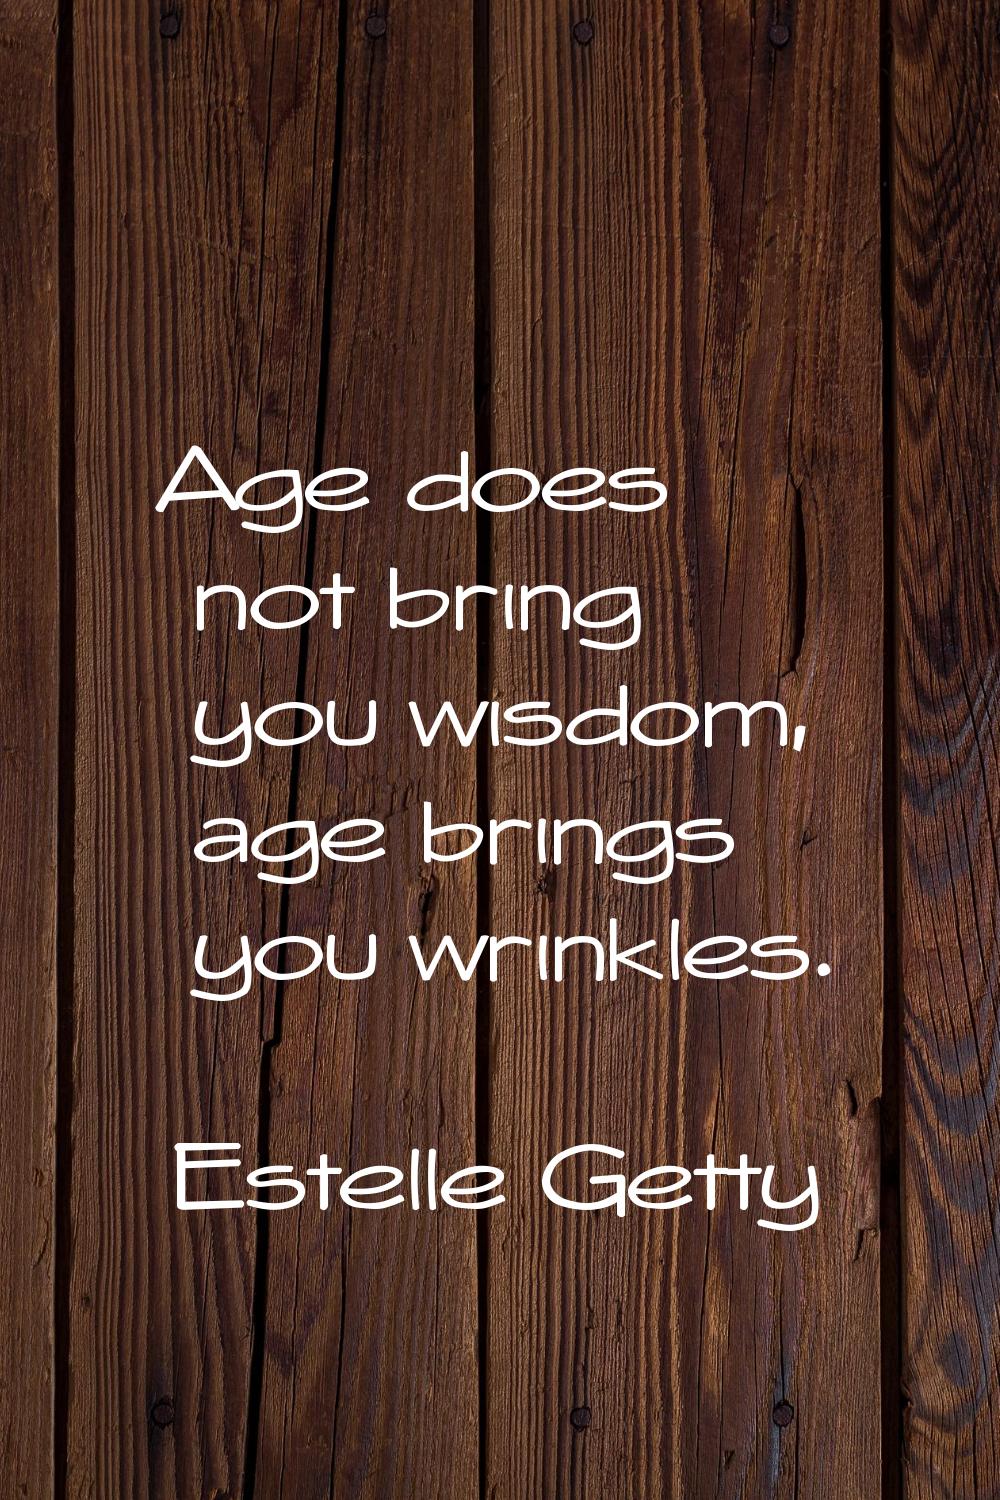 Age does not bring you wisdom, age brings you wrinkles.